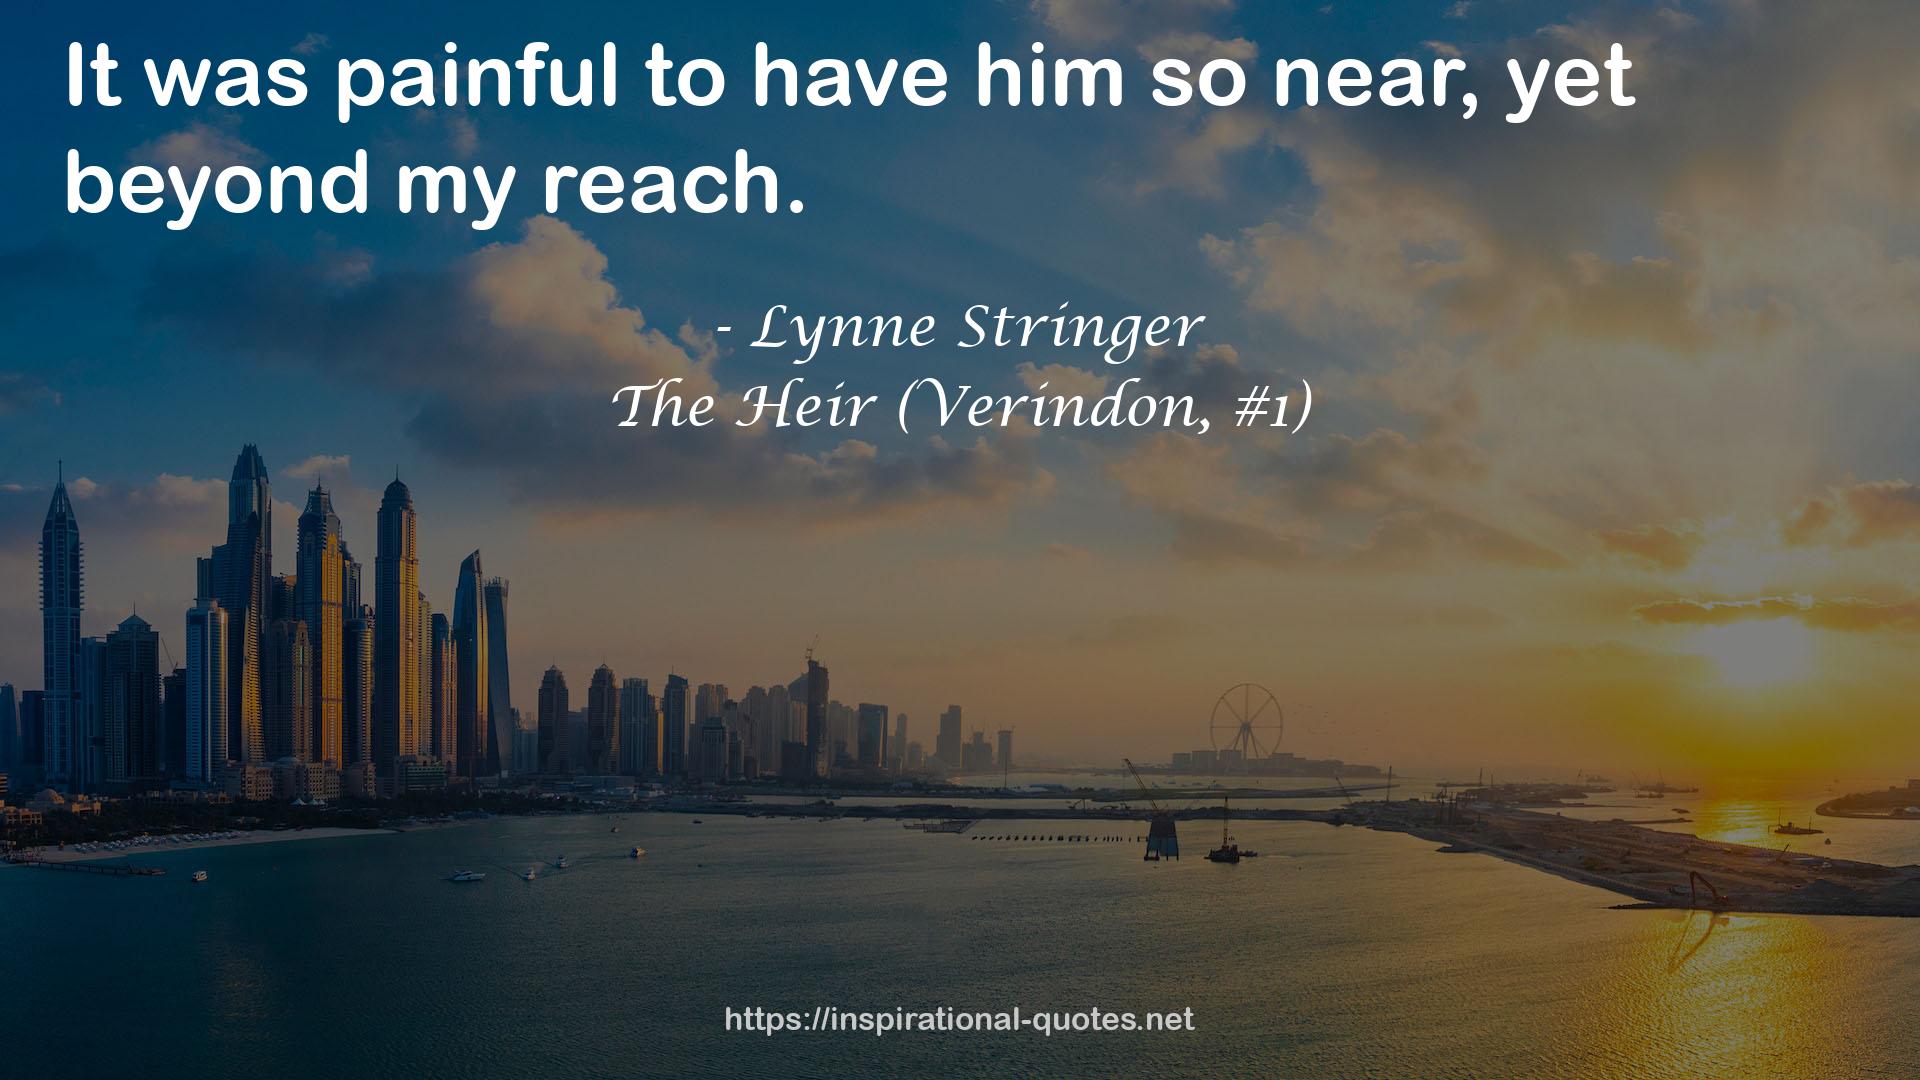 The Heir (Verindon, #1) QUOTES